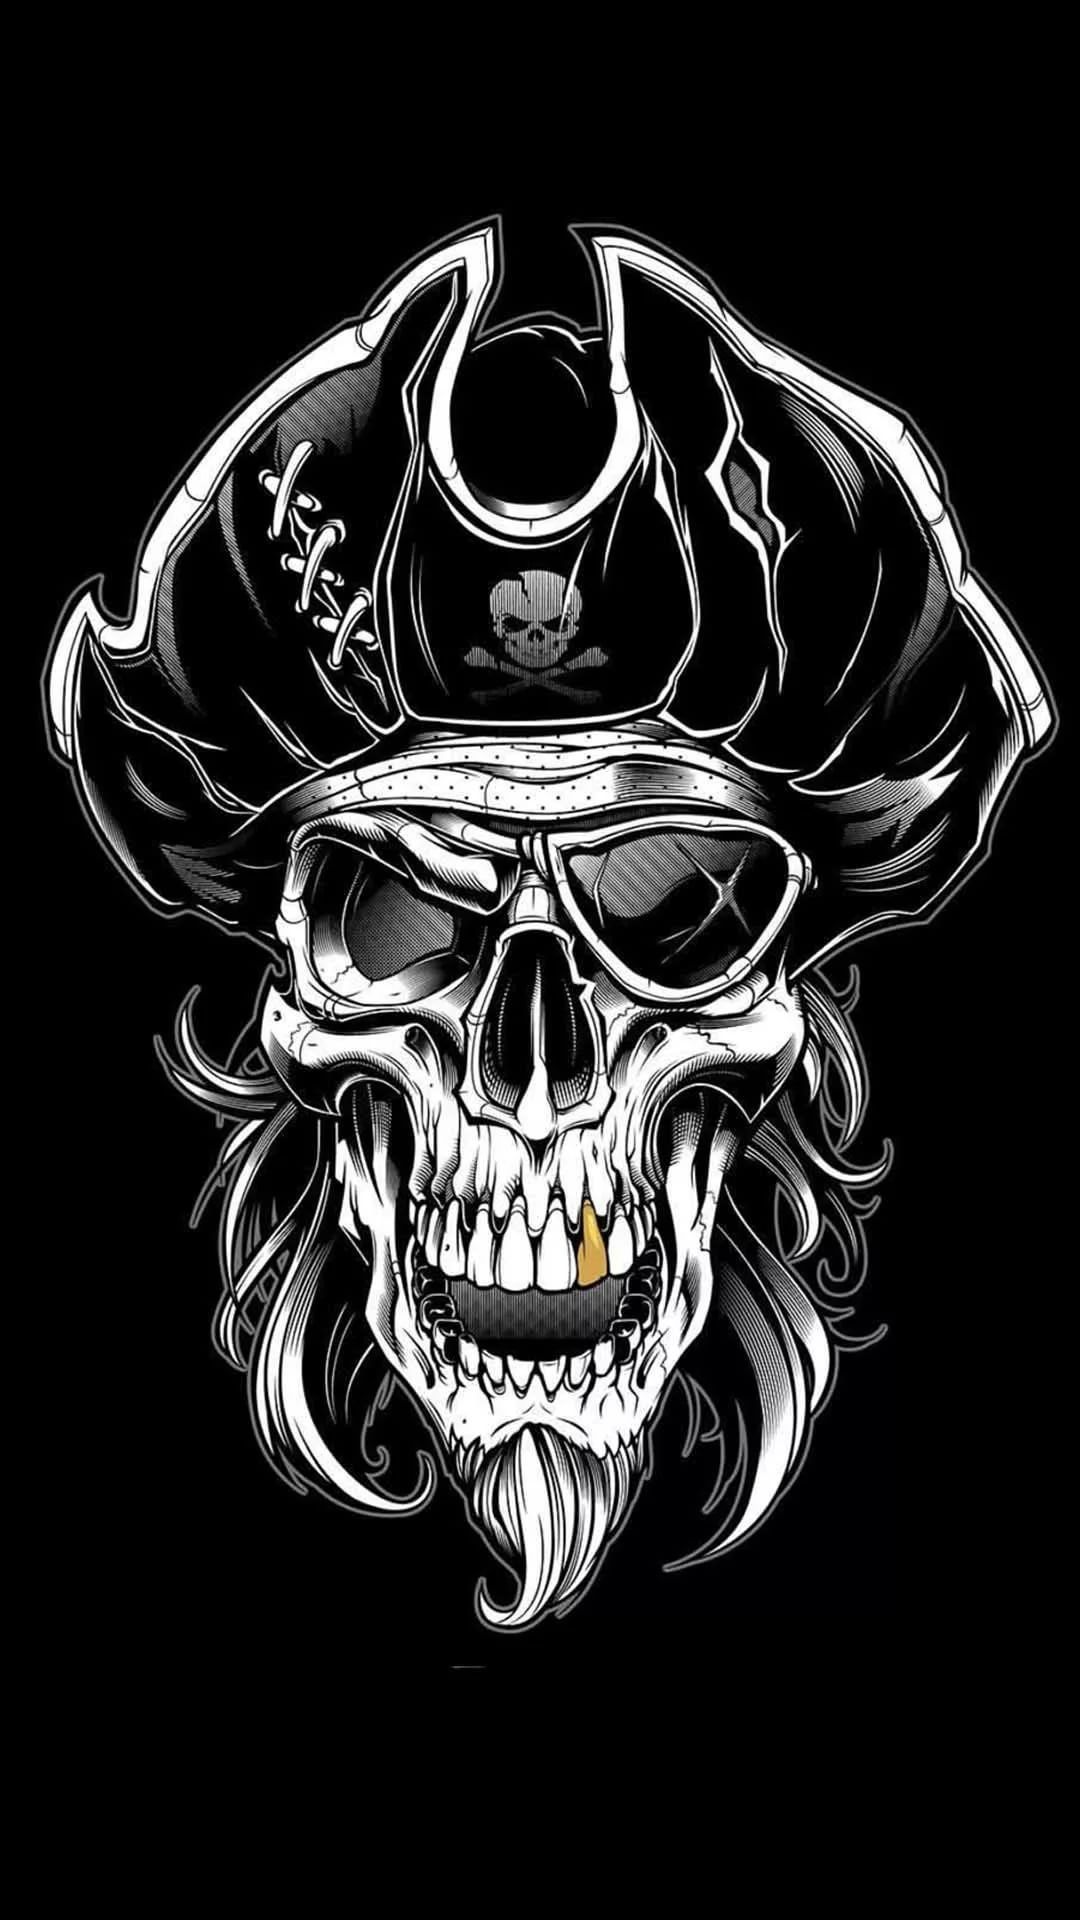 Skull pirate wallpaper for your phone - Pirate